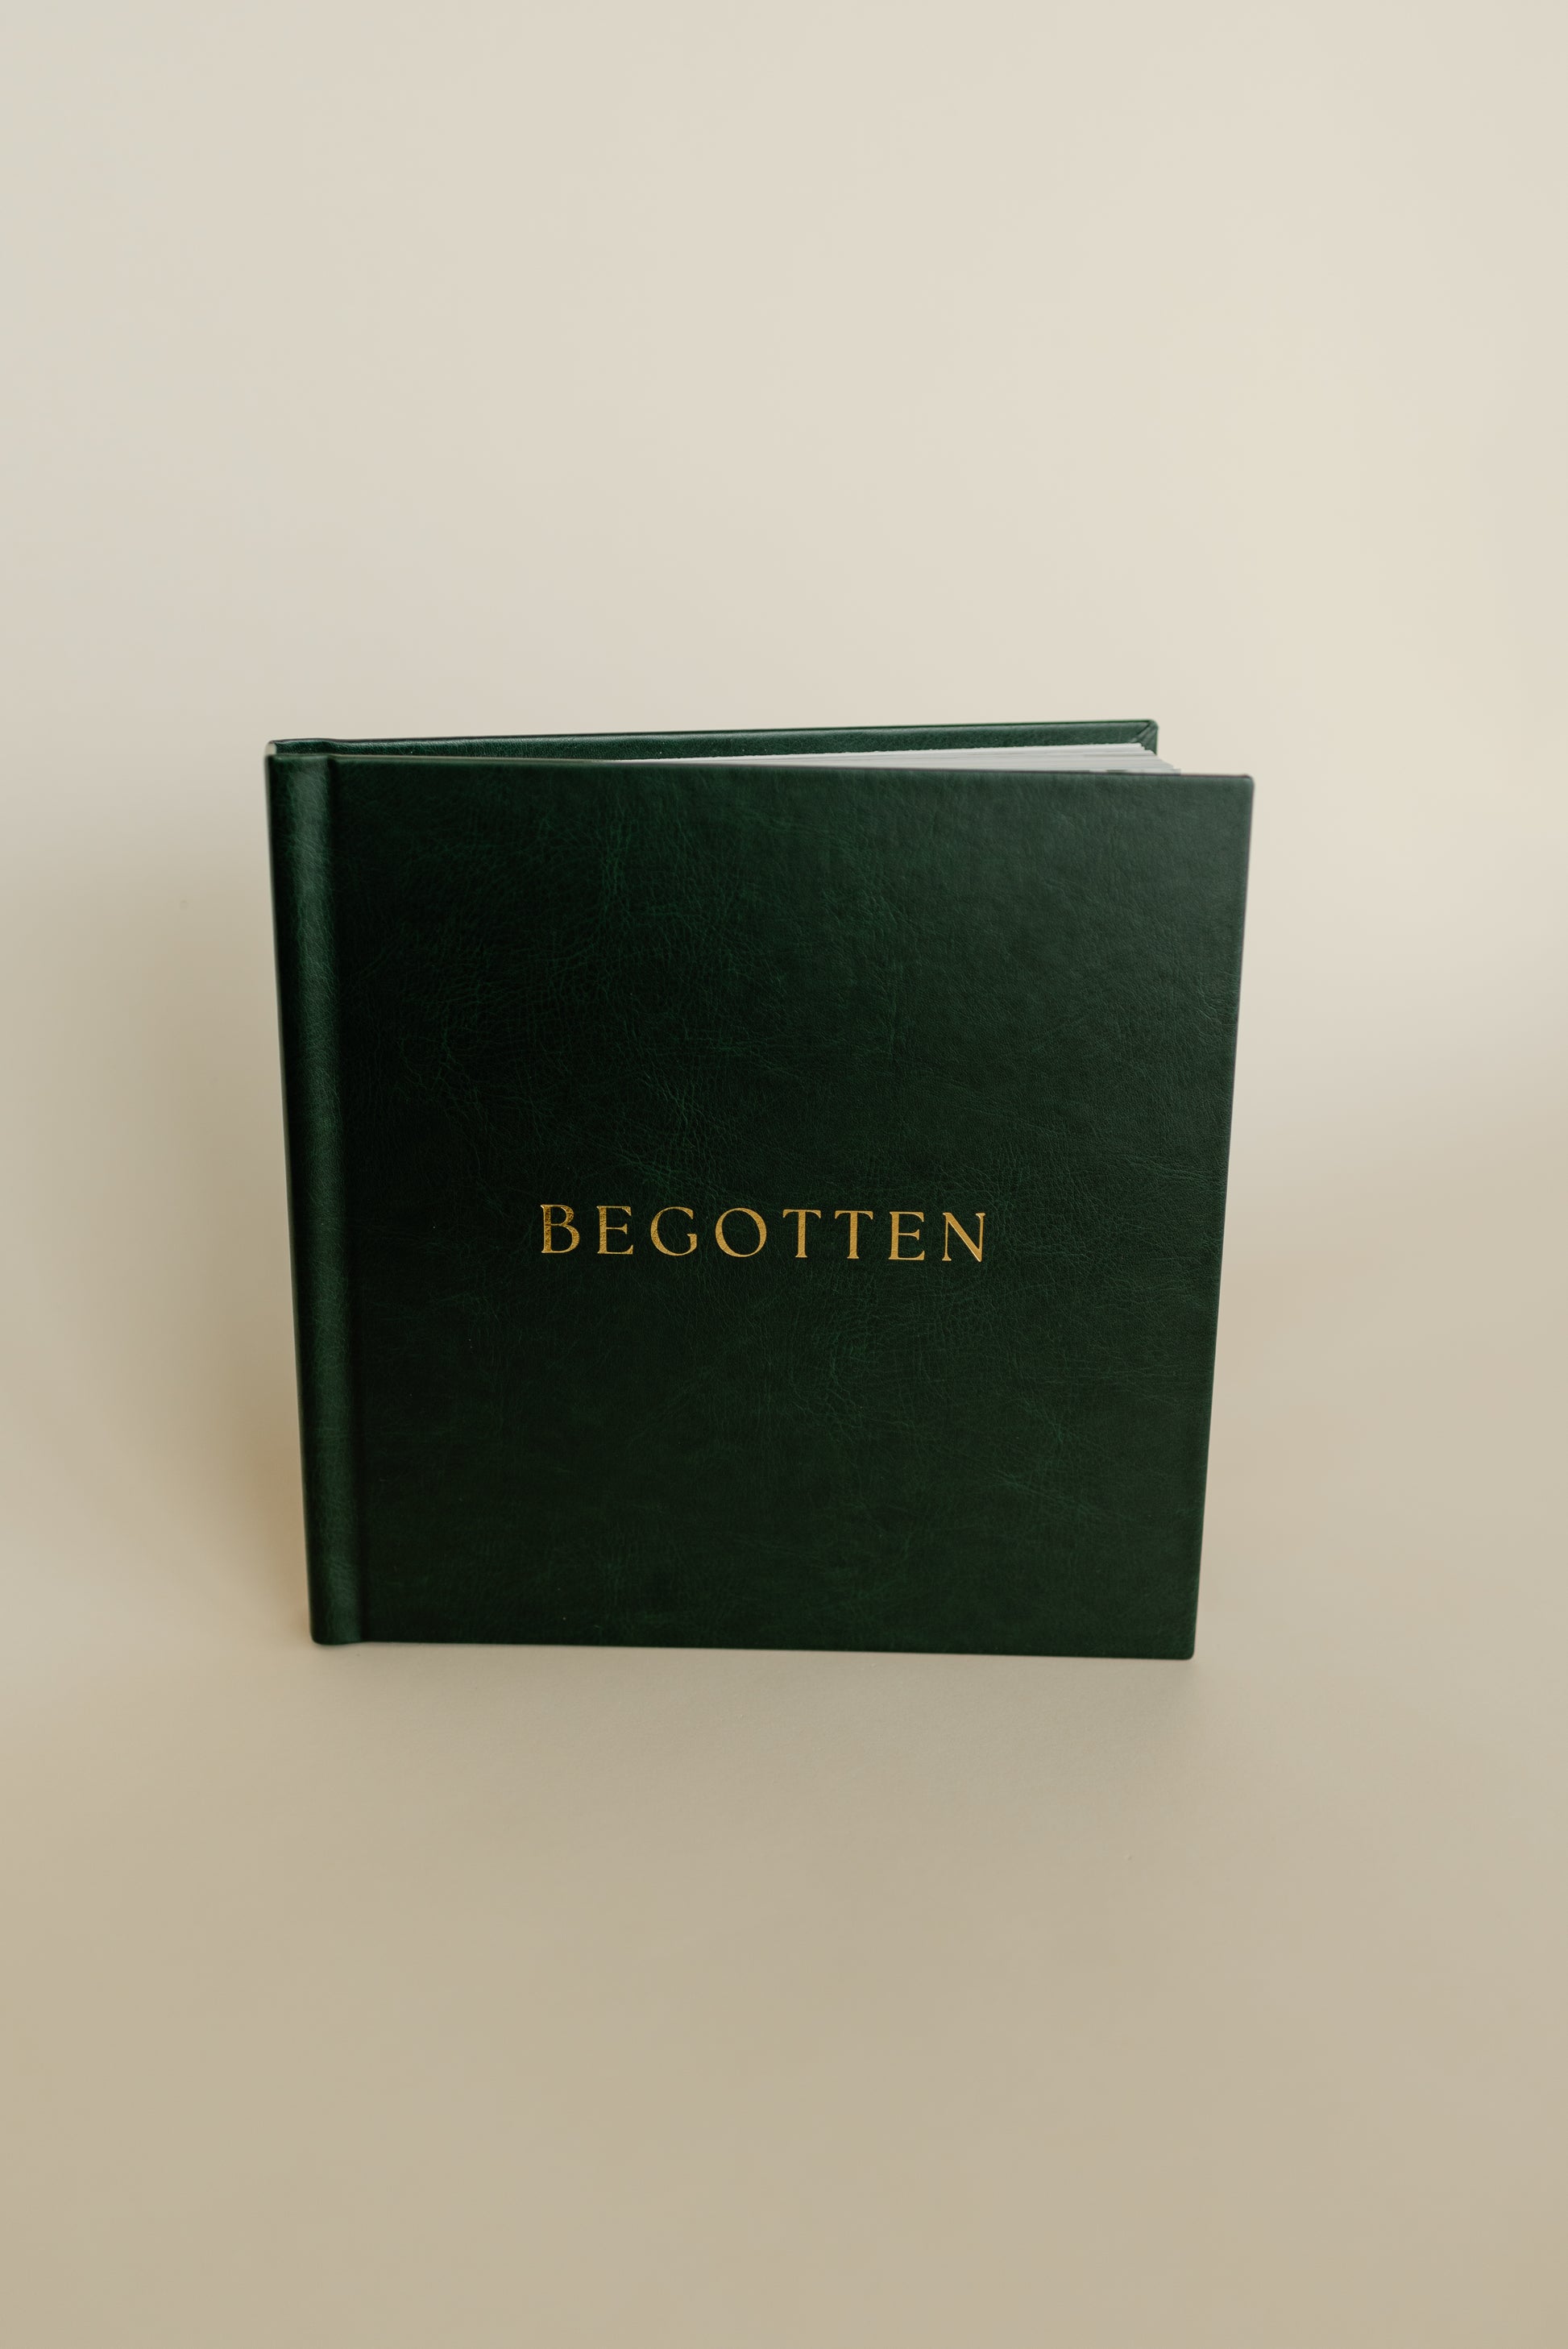 Begotten: Aesthetic Christmas Storytelling in a luxury Coffee Table Book